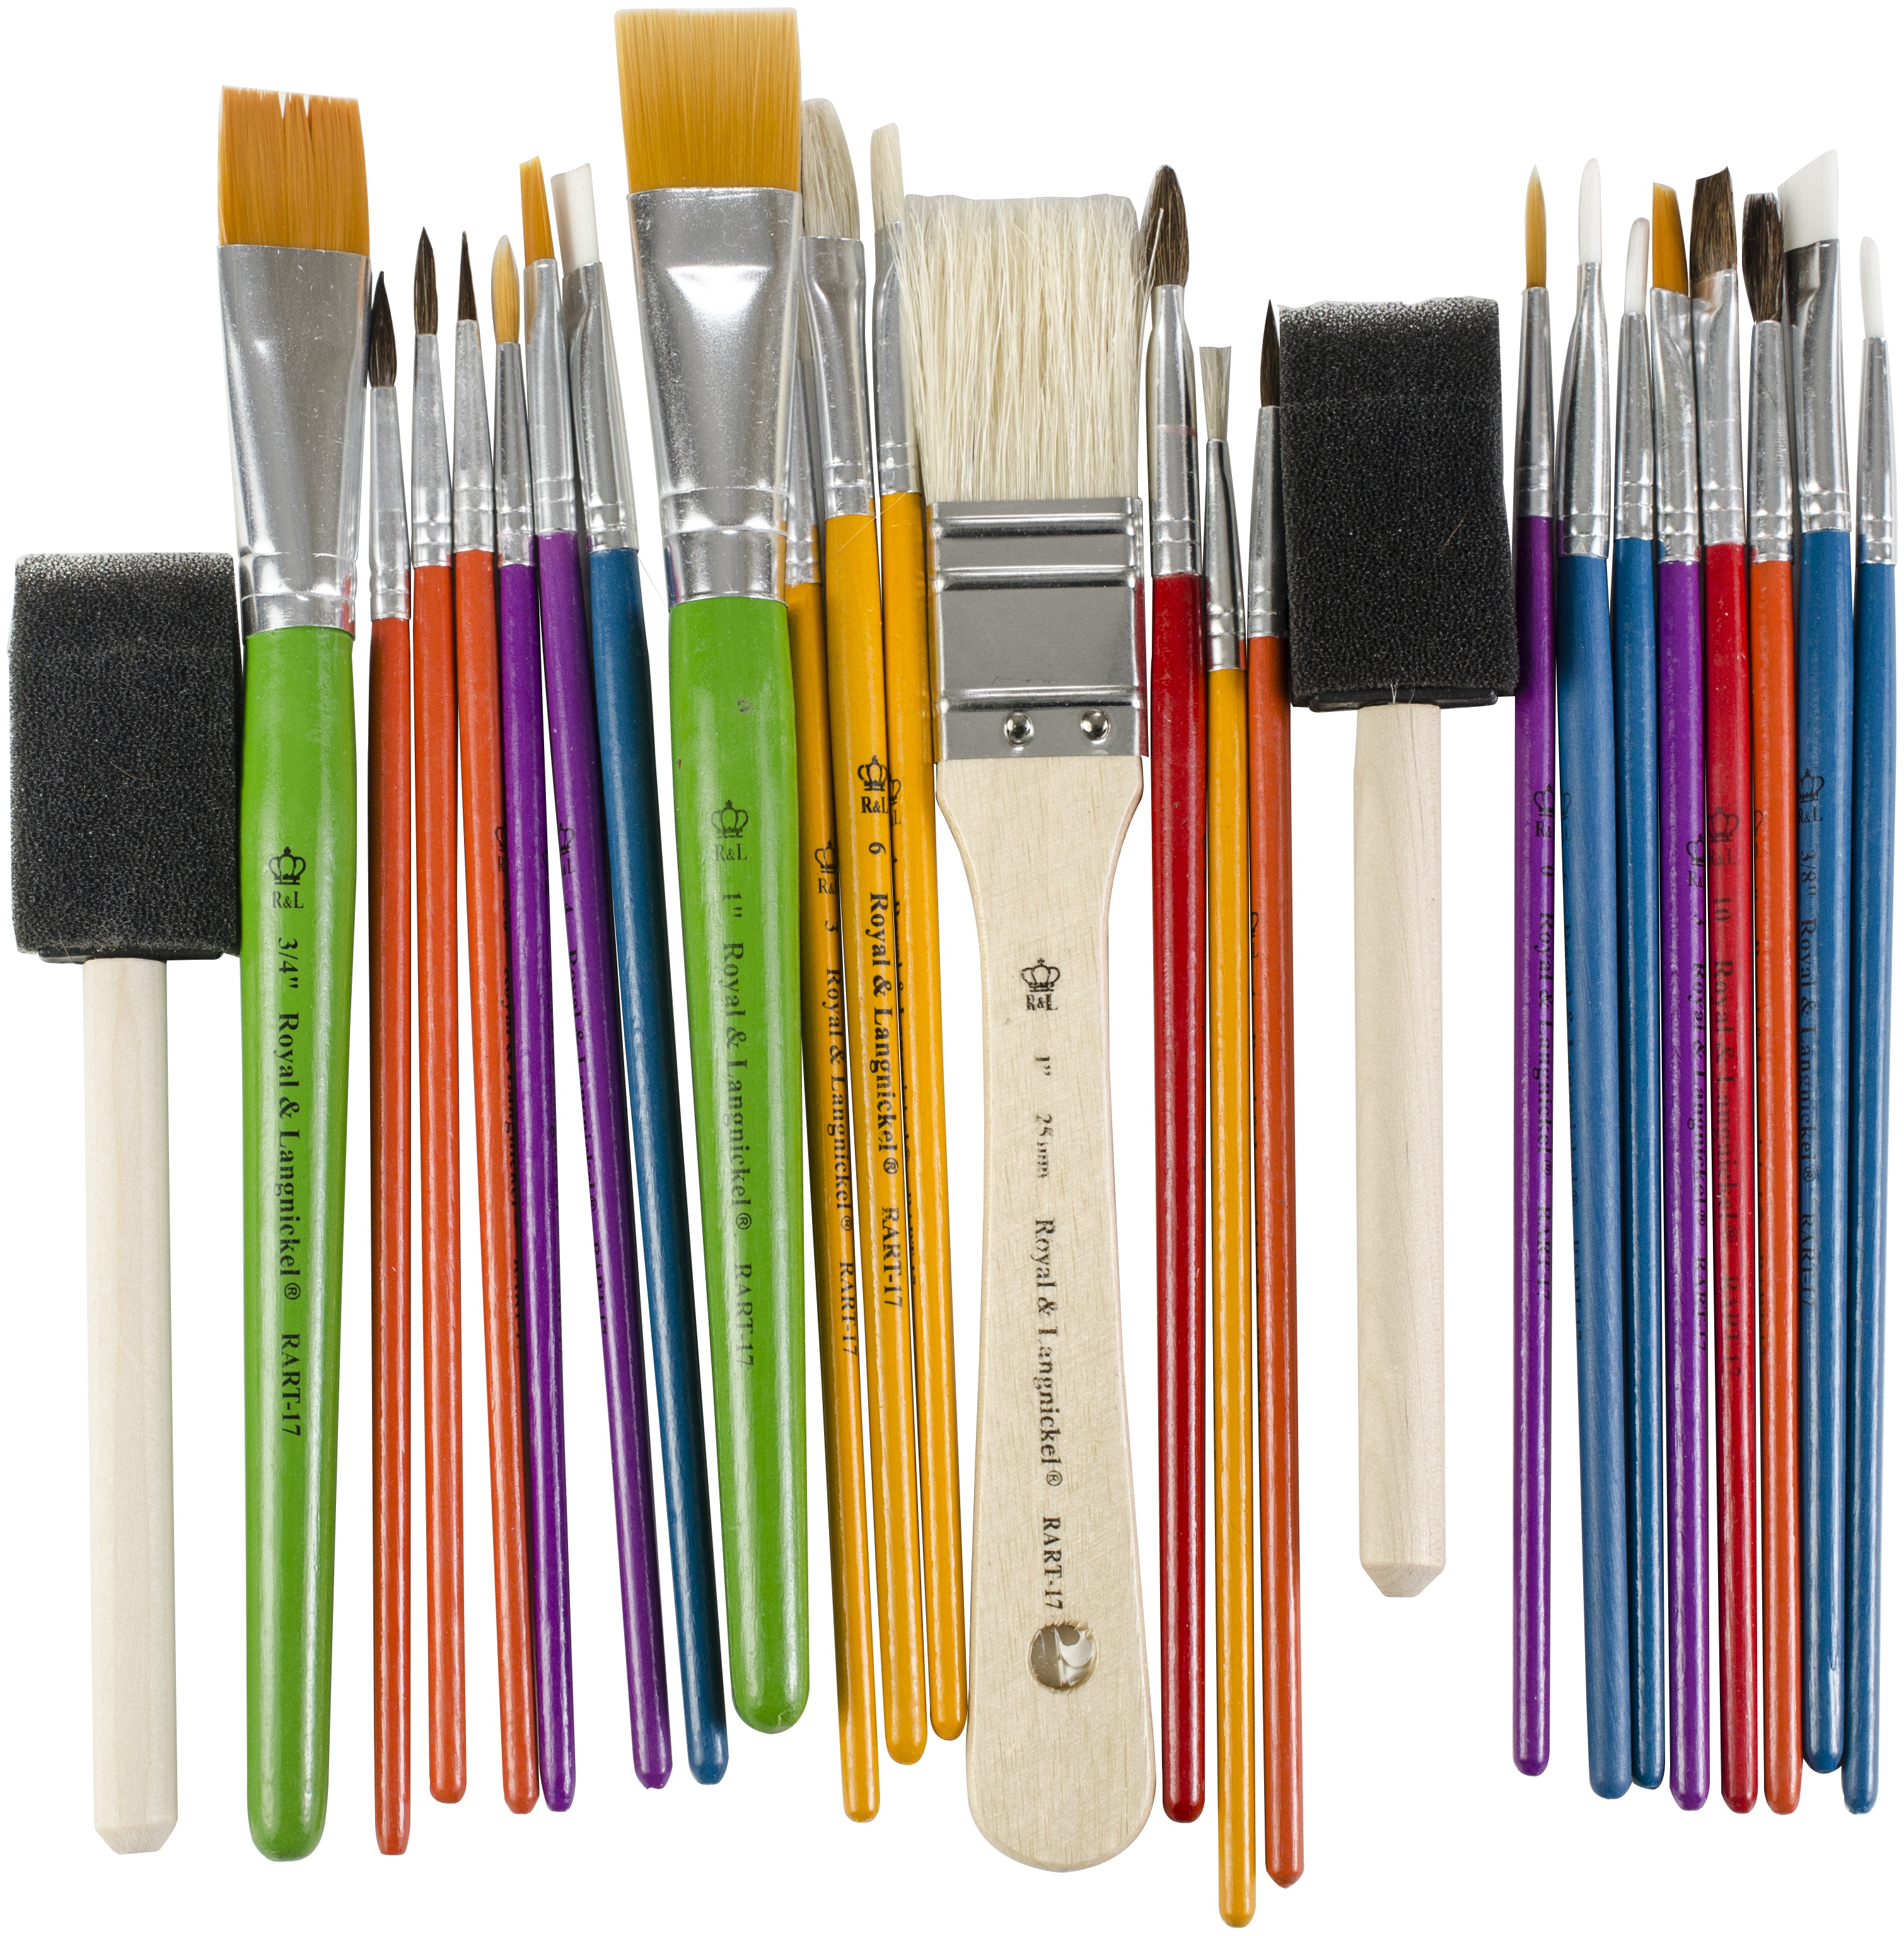 Royal & Langnickel 25-Piece Brush Value Pack, Assorted Sizes - image 1 of 2